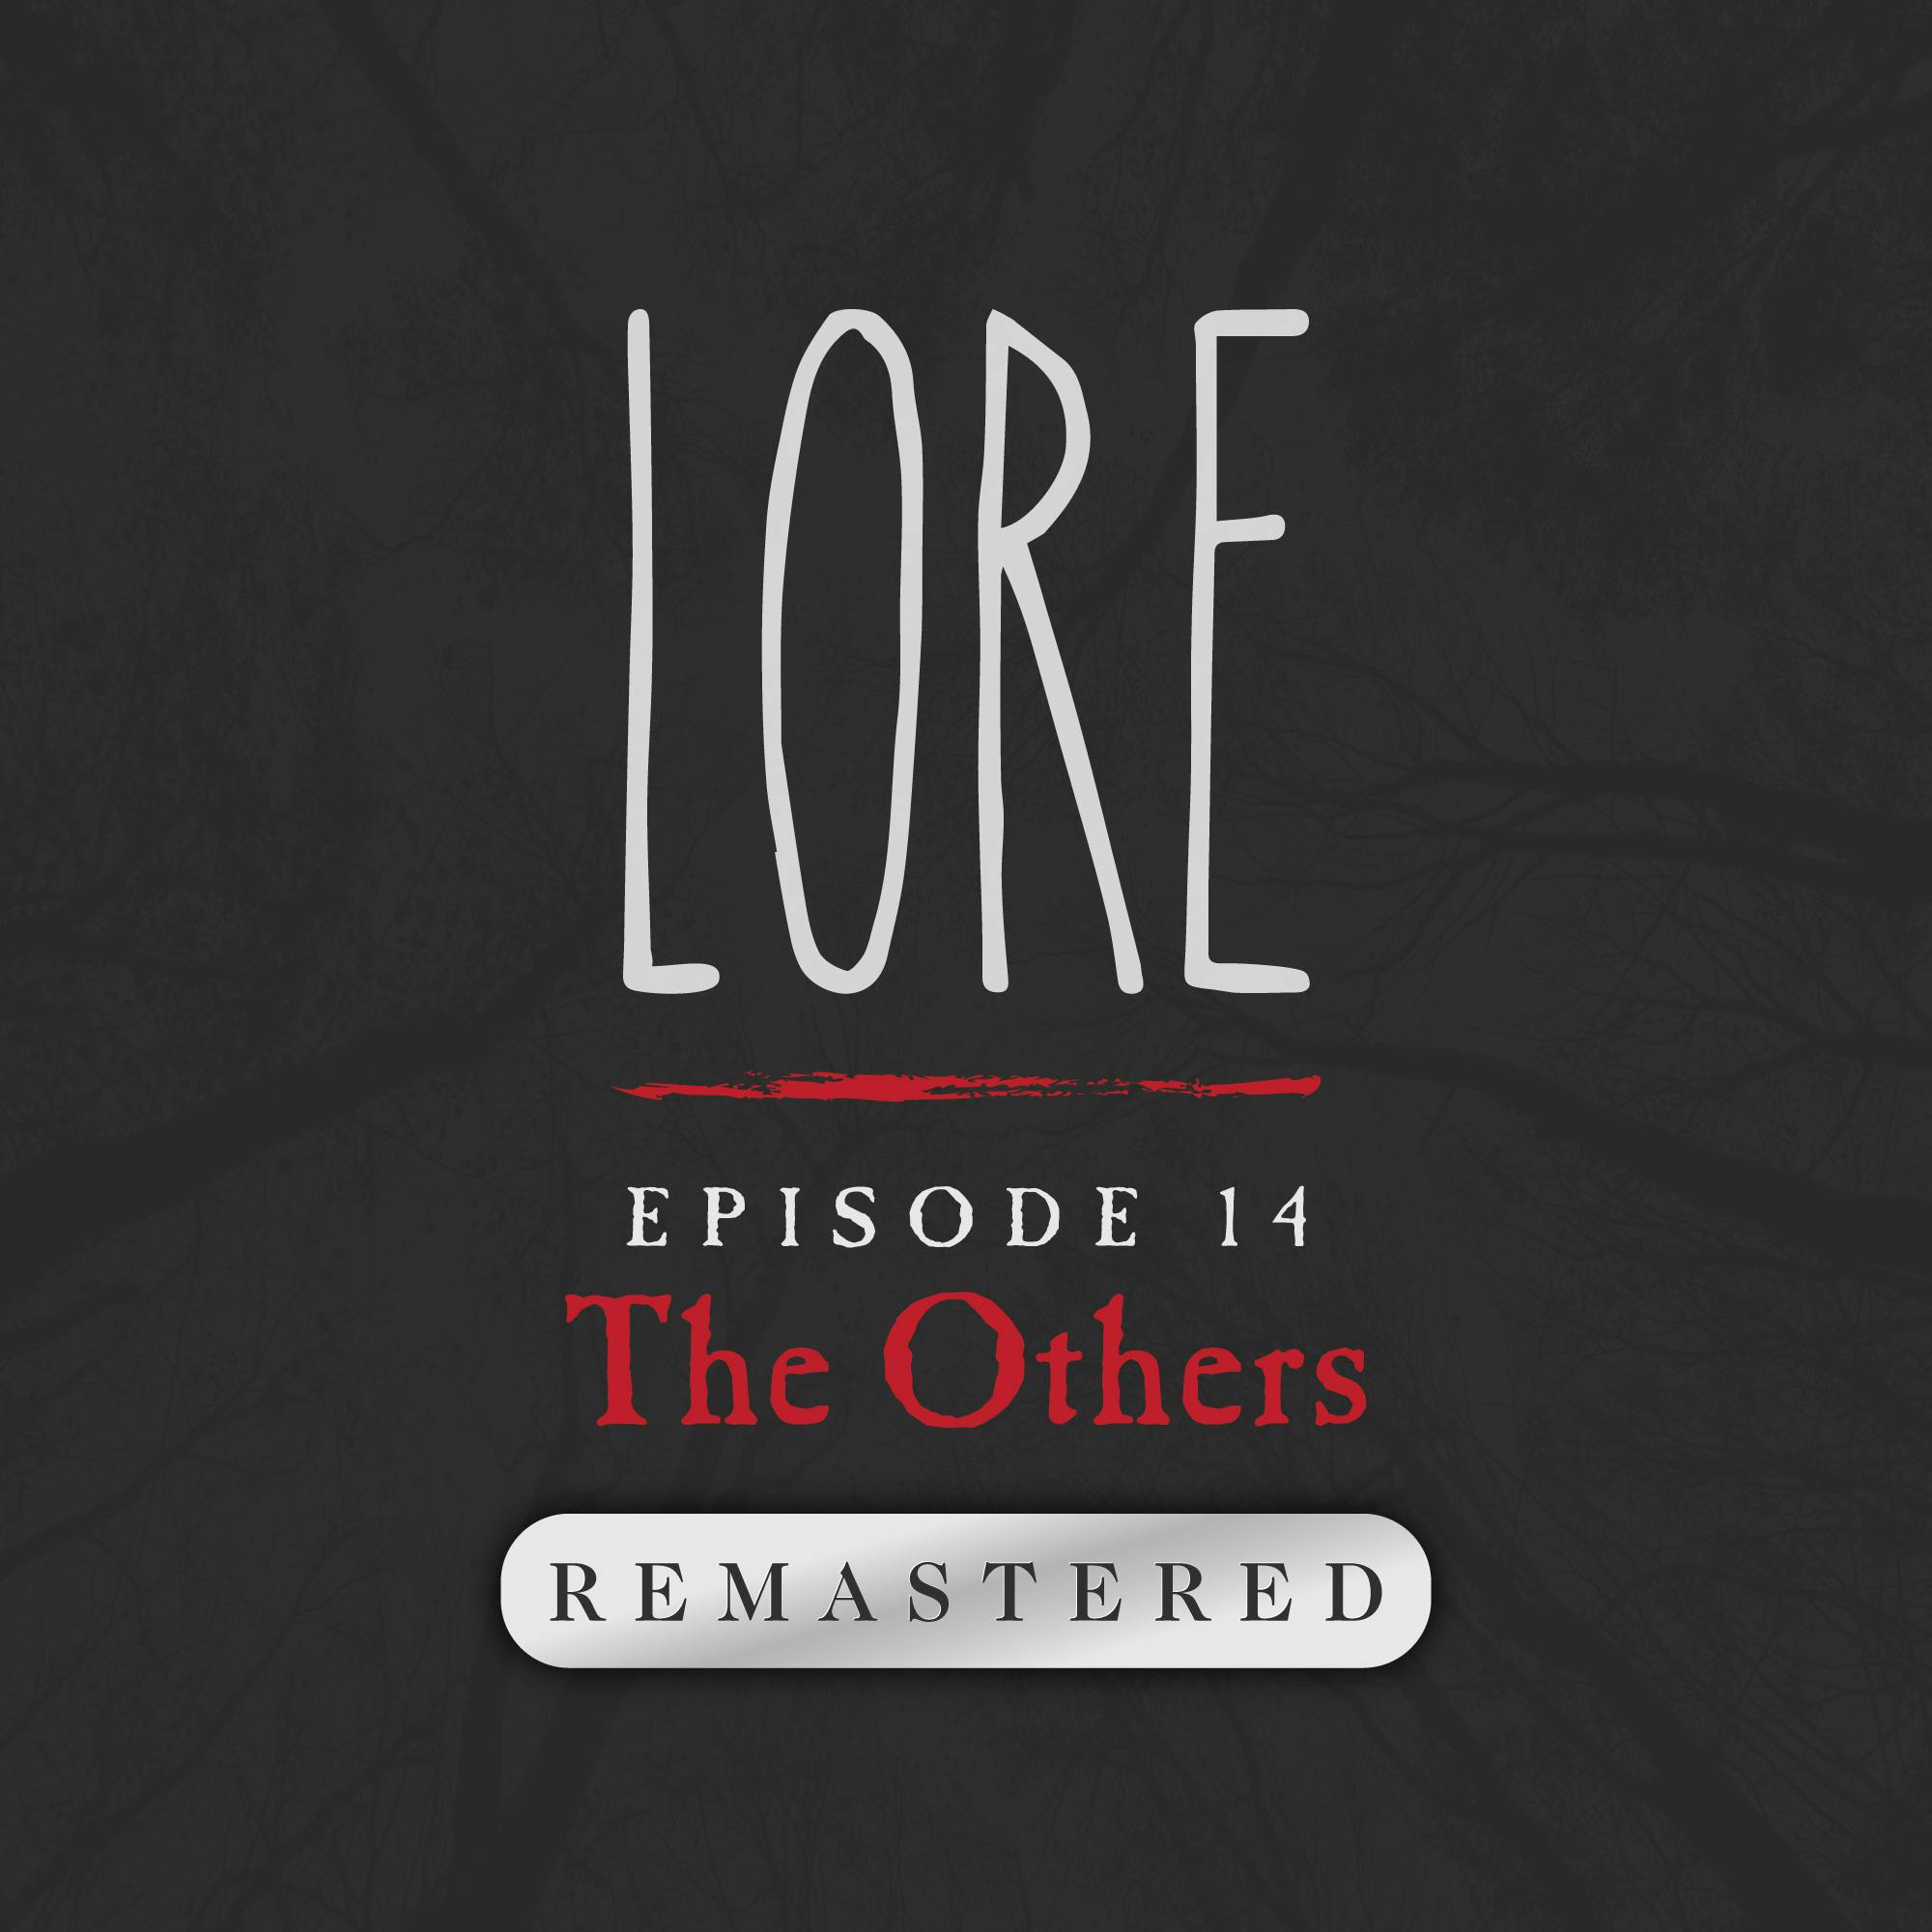 REMASTERED – Episode 14: The Others